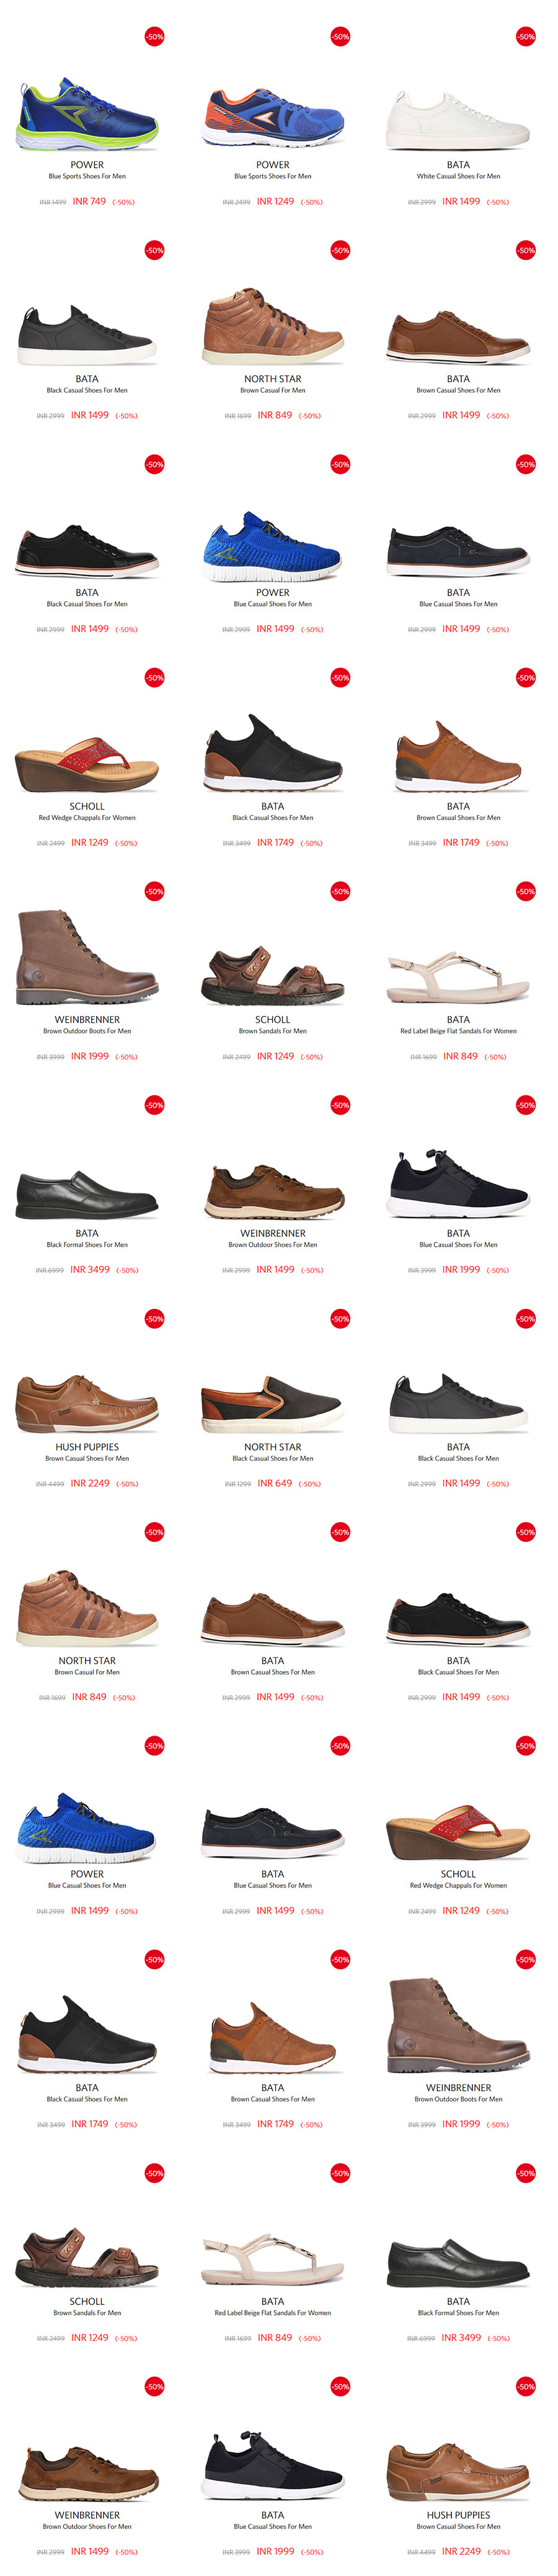 bata shoes sale 2019 with price